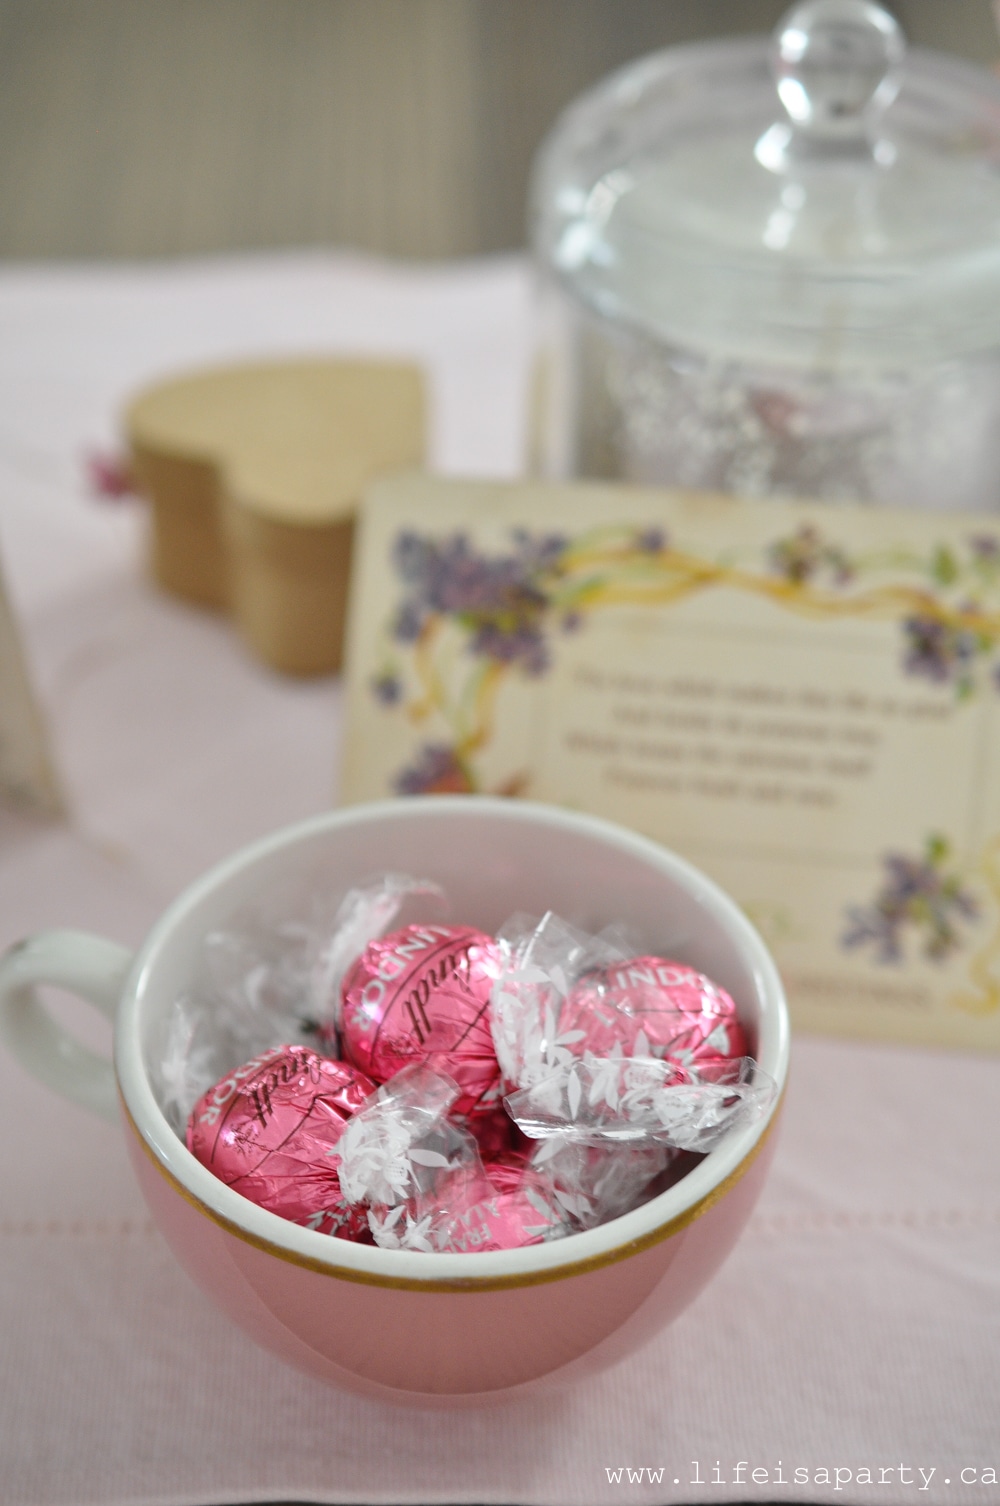 chocolates in a vintage pink teacup for Valentine's Day